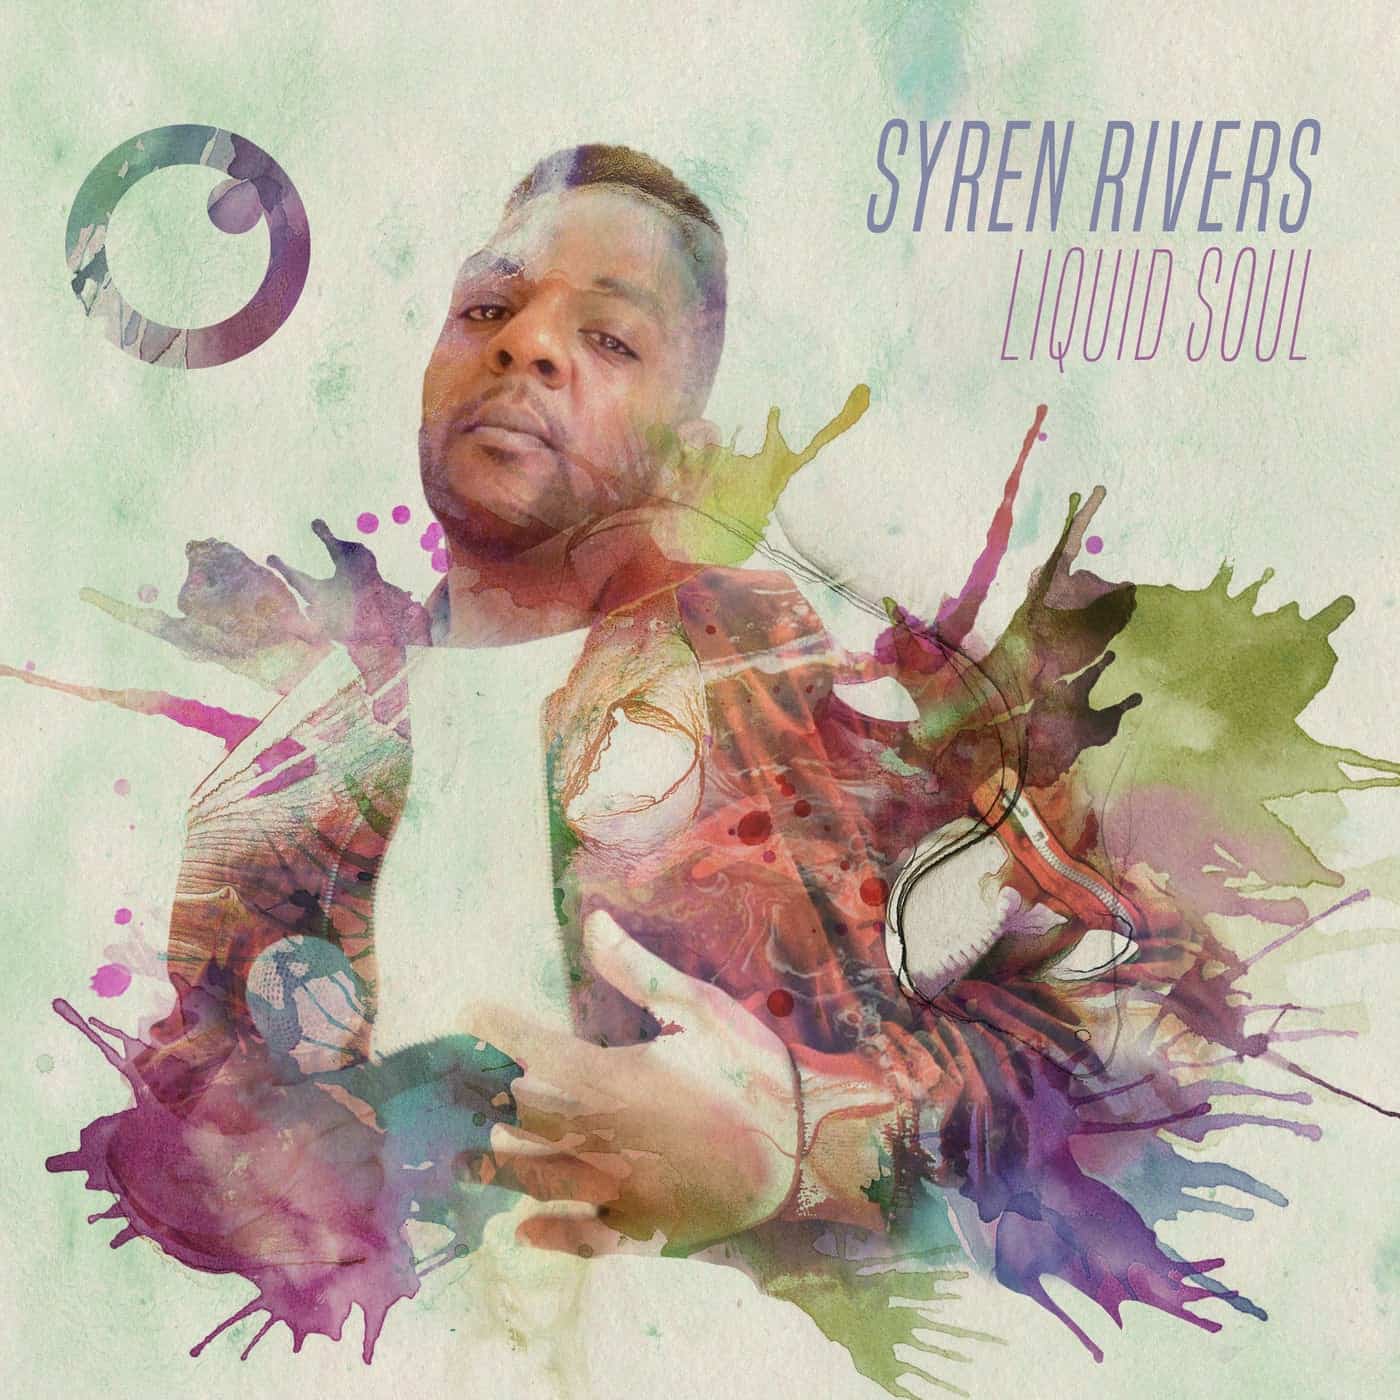 Download Syren Rivers - Liquid Soul on Electrobuzz